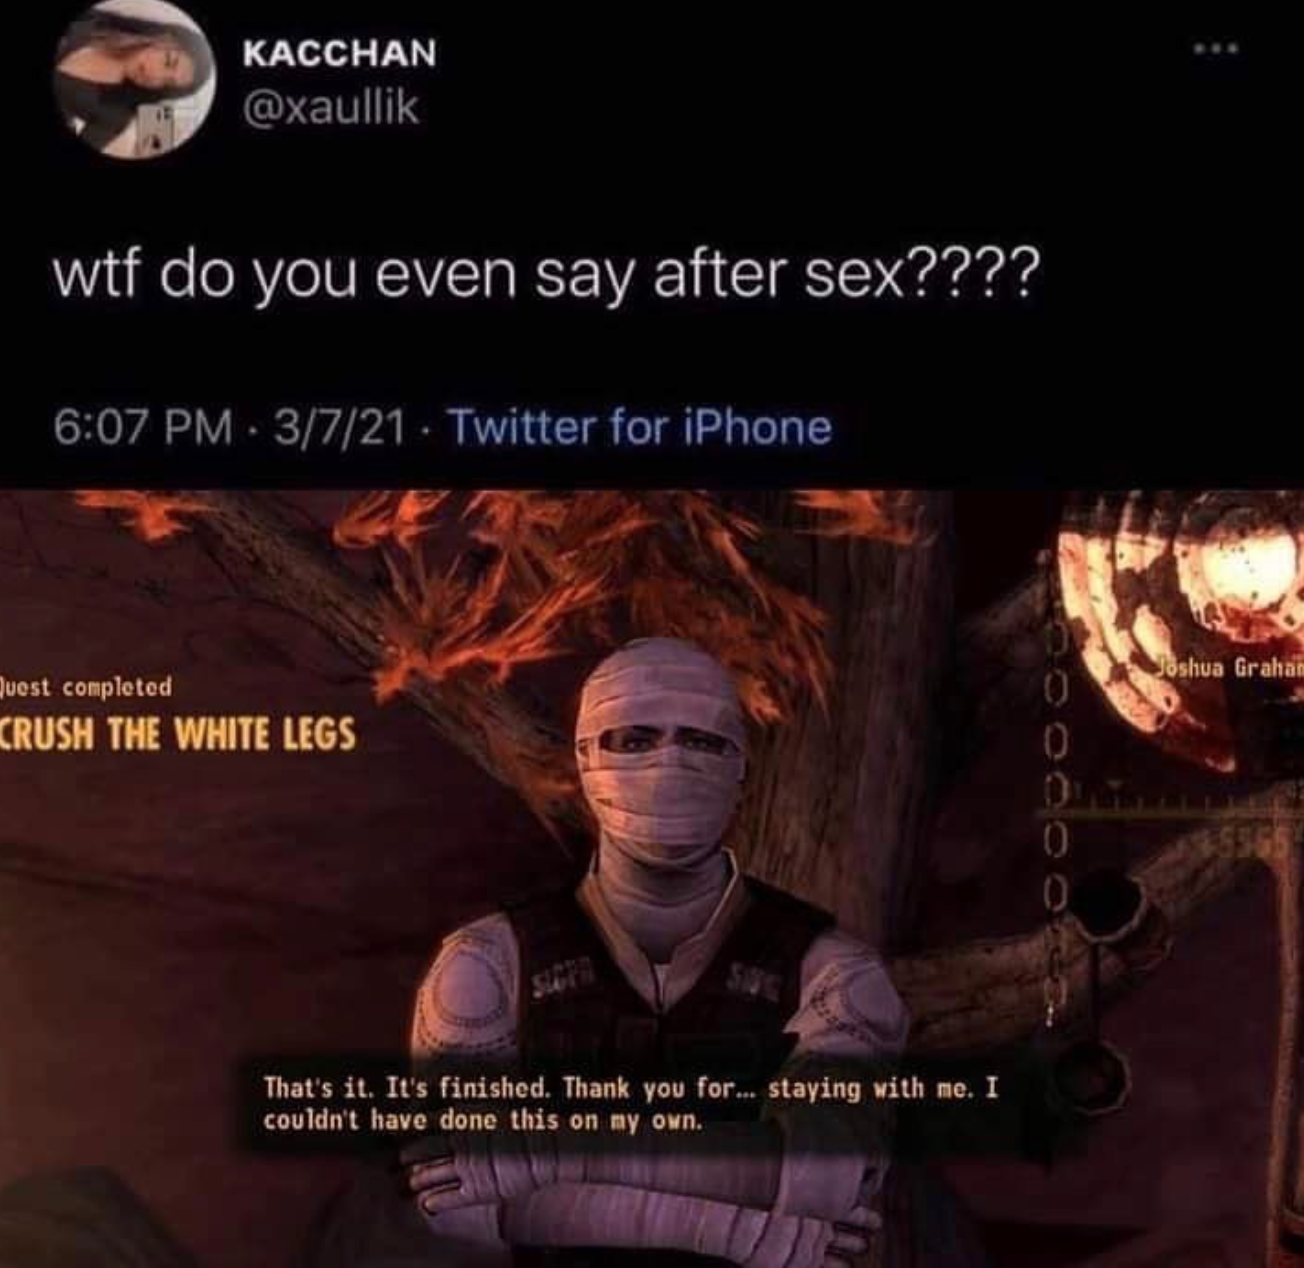 funny gaming memes - poster - Kacchan wtf do you even say after sex???? 3721. Twitter for iPhone Joshua Graha est completed Crush The White Legs 0 0 That's it. It's finished. Thank you for... staying with me. I couldn't have done this on my own.